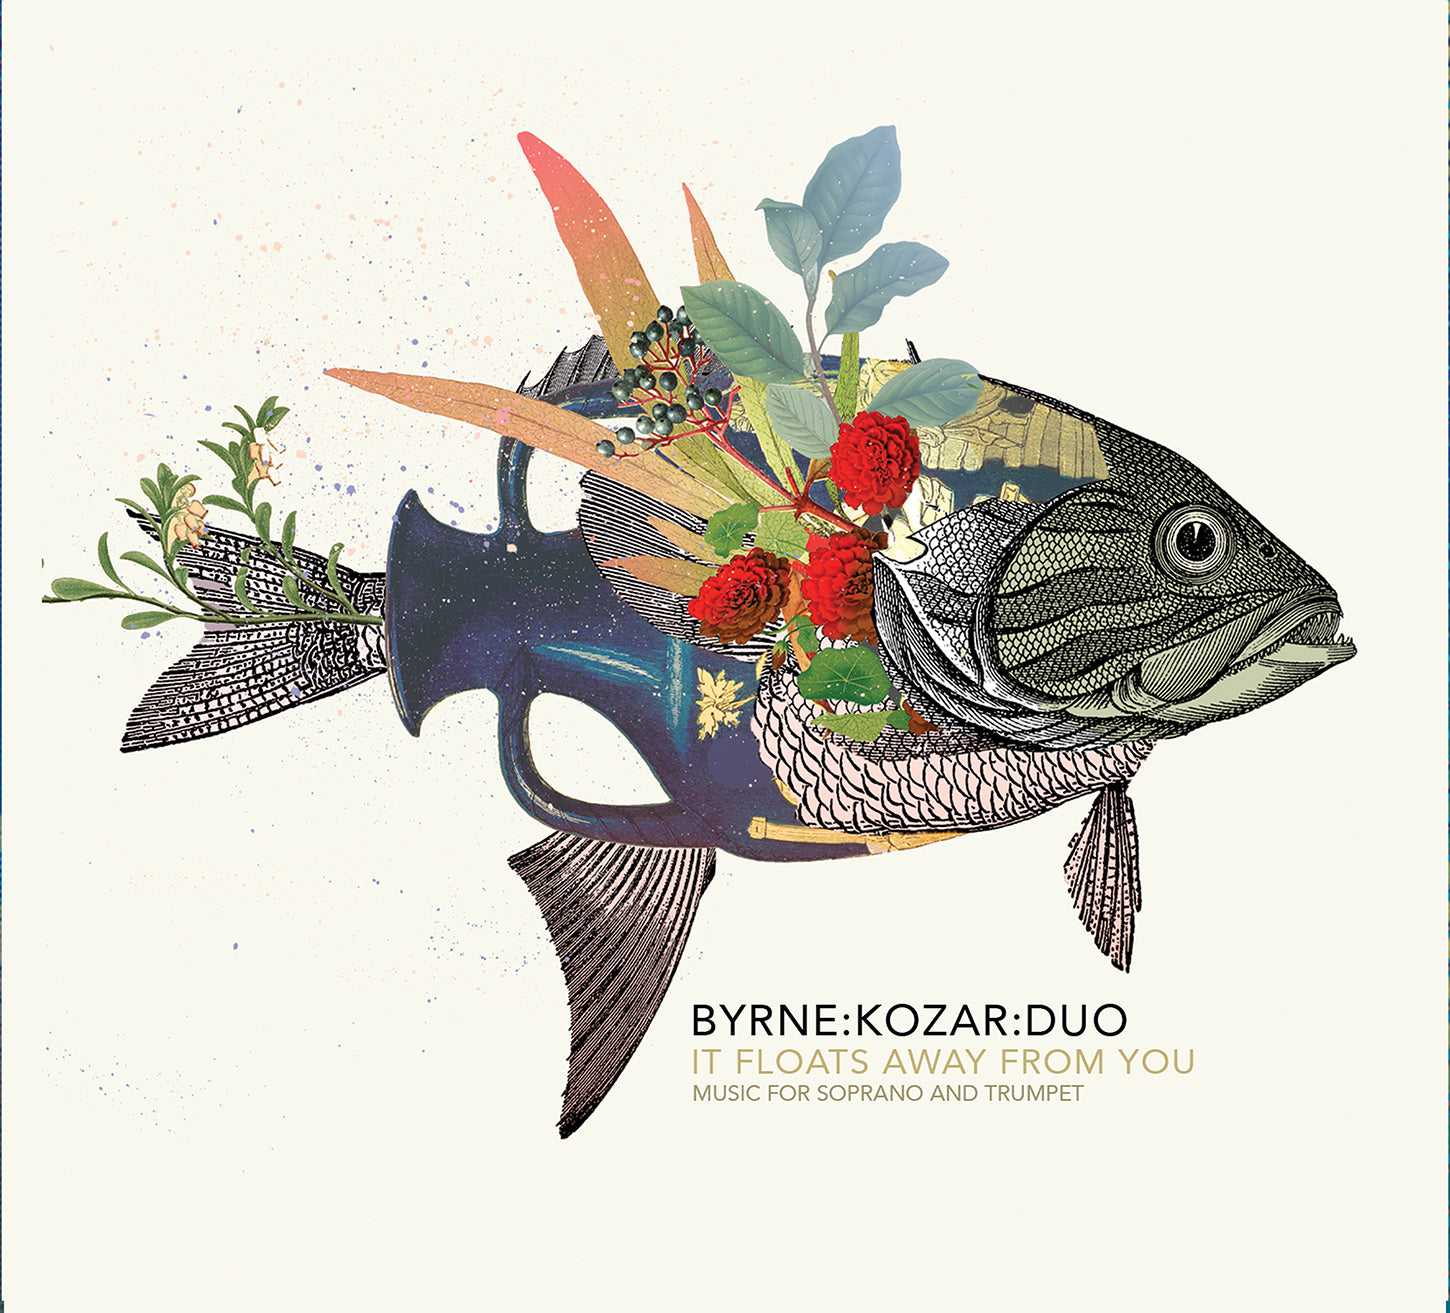 It Floats Away From You - New Music for Voice & Trumpet / Byrne:Kozar:Duo